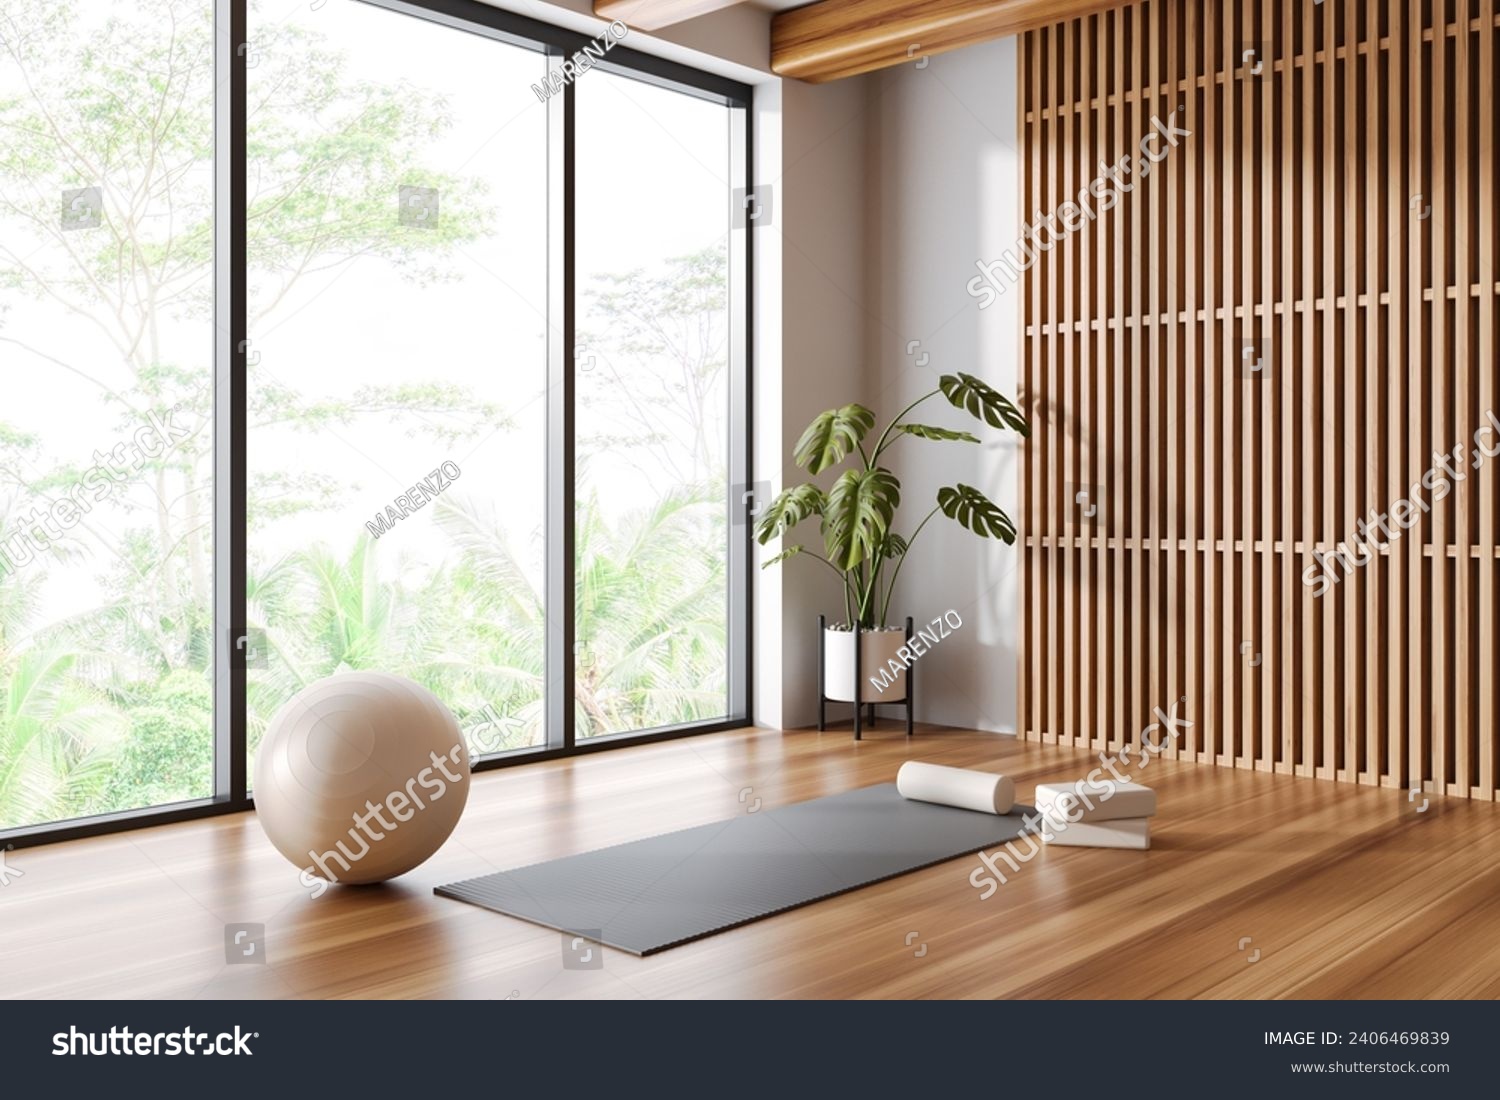 Corner of panoramic yoga studio with white and wooden walls, wooden floor, yoga mat and white fitball. 3d rendering #2406469839